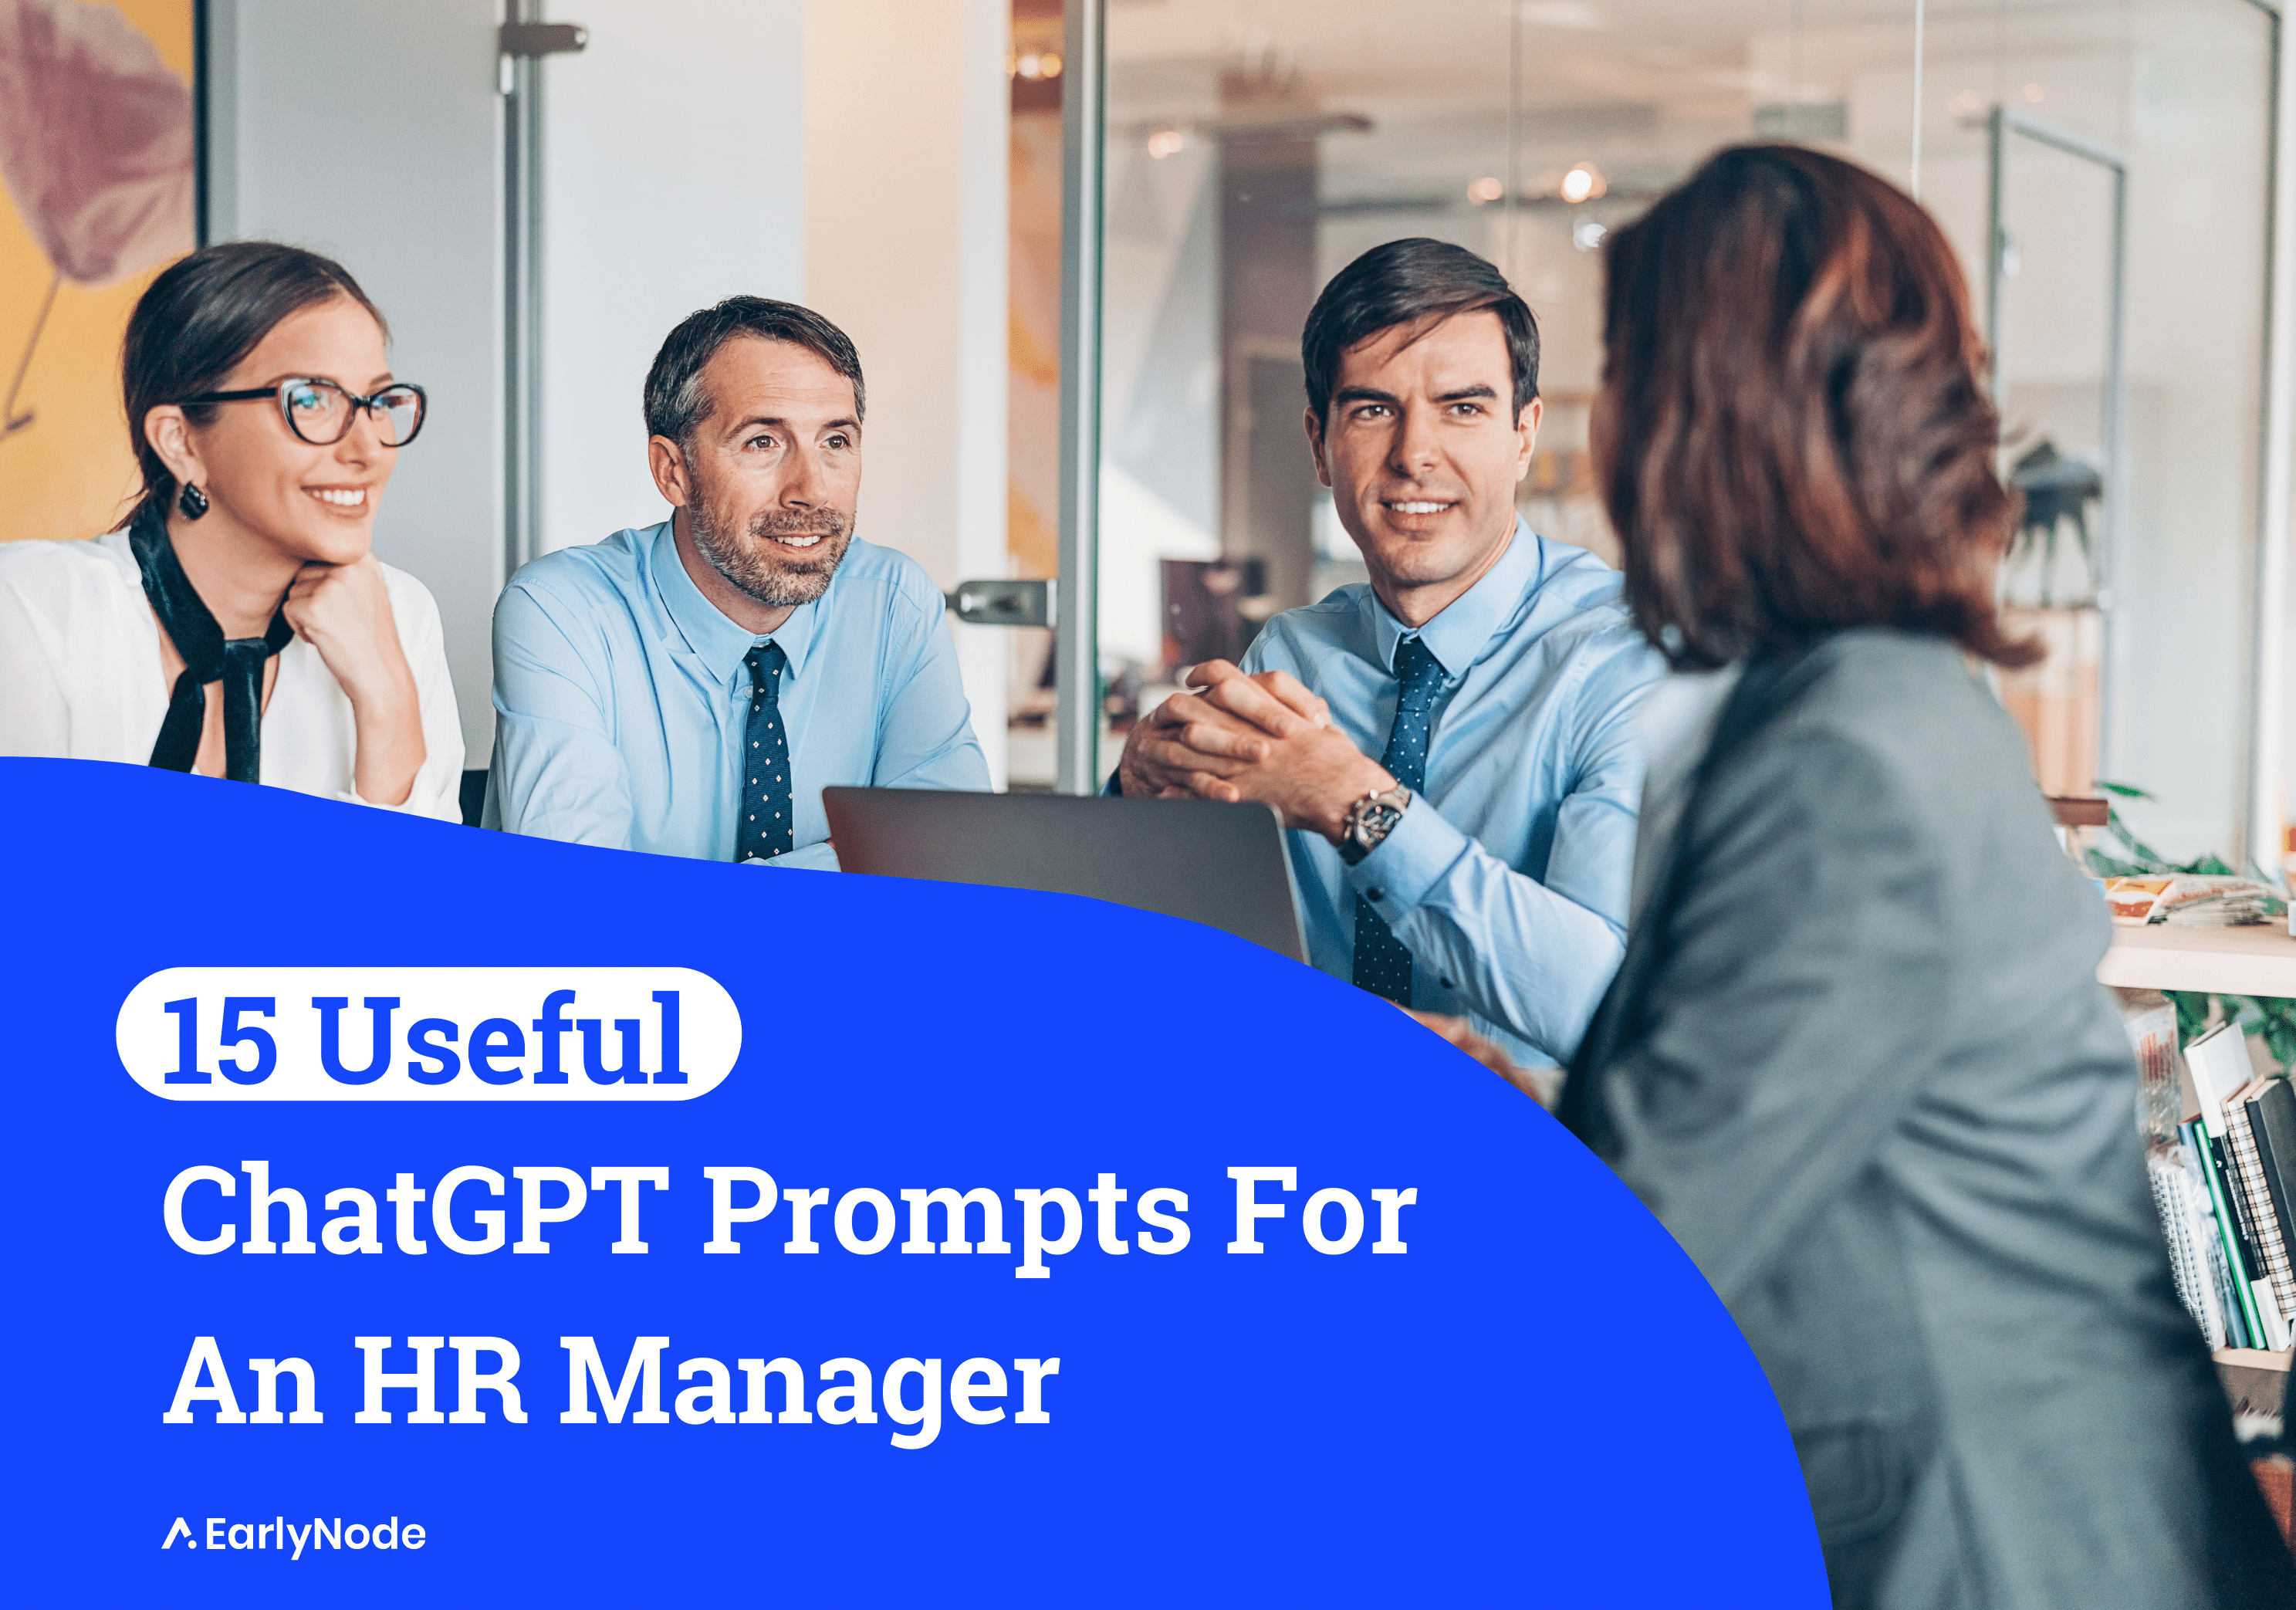 15 Tailored ChatGPT Prompts for HR Managers